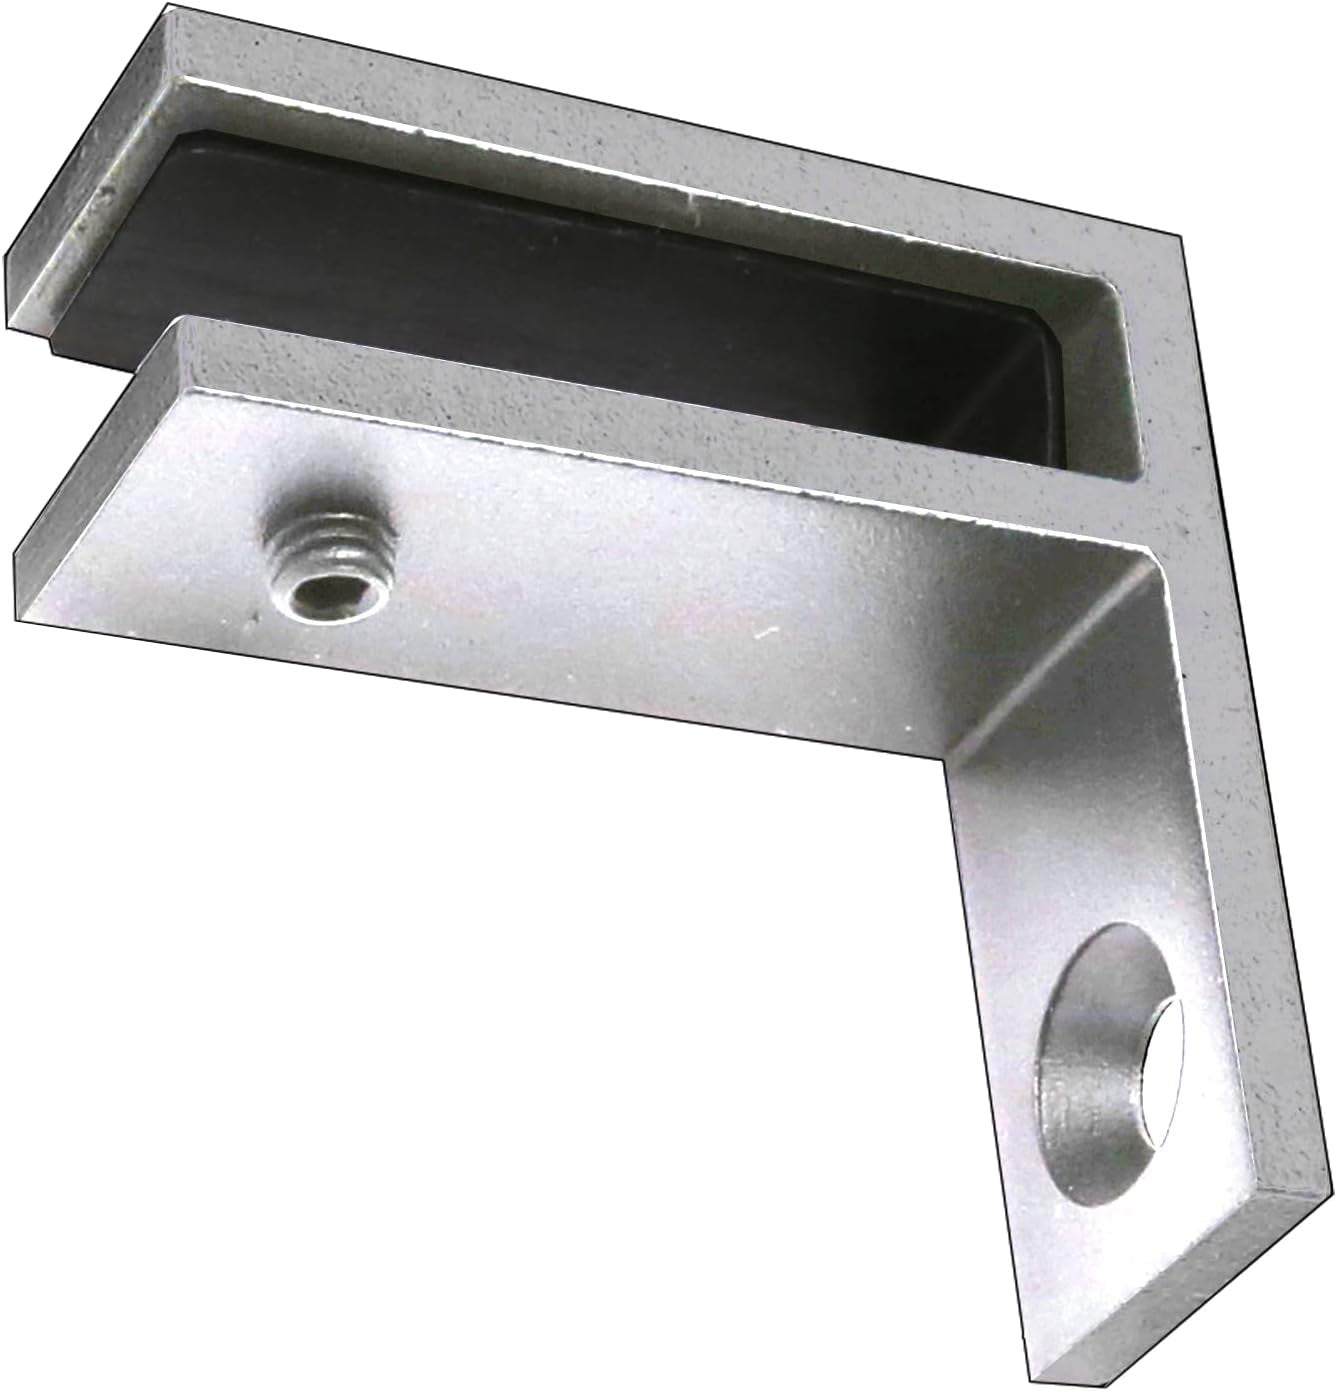 Stainless Steel 90 Degree to Wall  1/2" Glass to Wall Clamp Railing  (G1220) - SHEMONICO